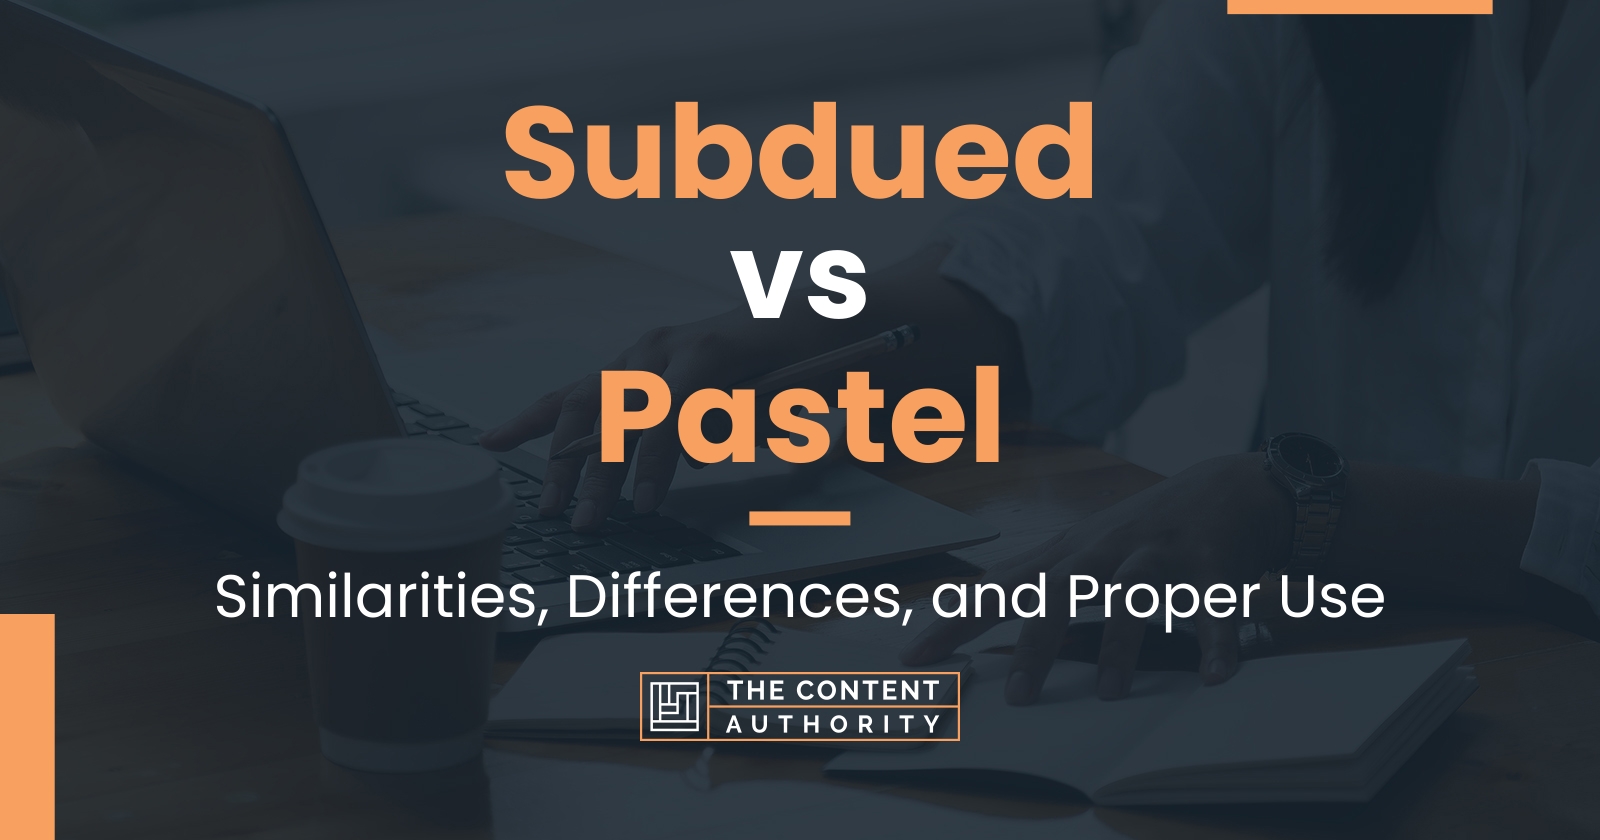 Subdued vs Pastel: Similarities, Differences, and Proper Use